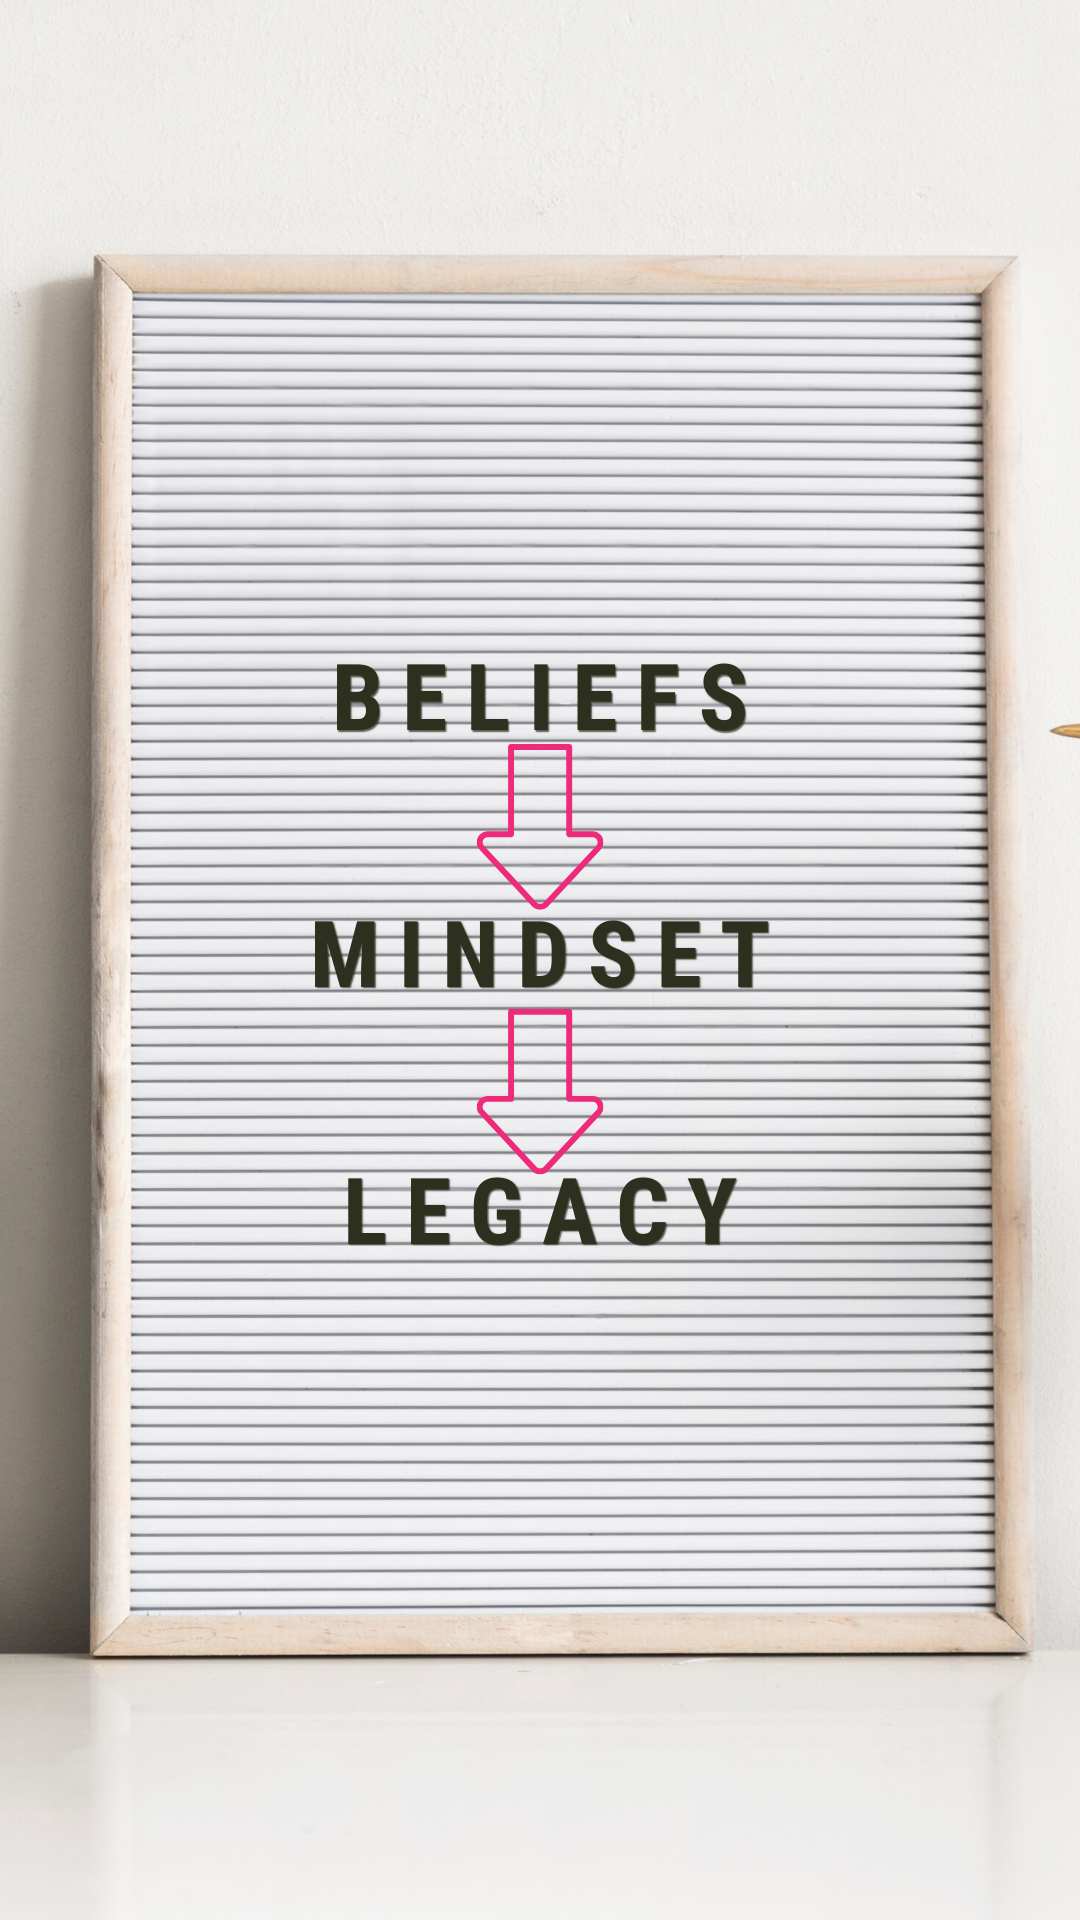 white message board with light tan wooden frame with the words "BELIEFS --> MINDSET --> LEGACY"